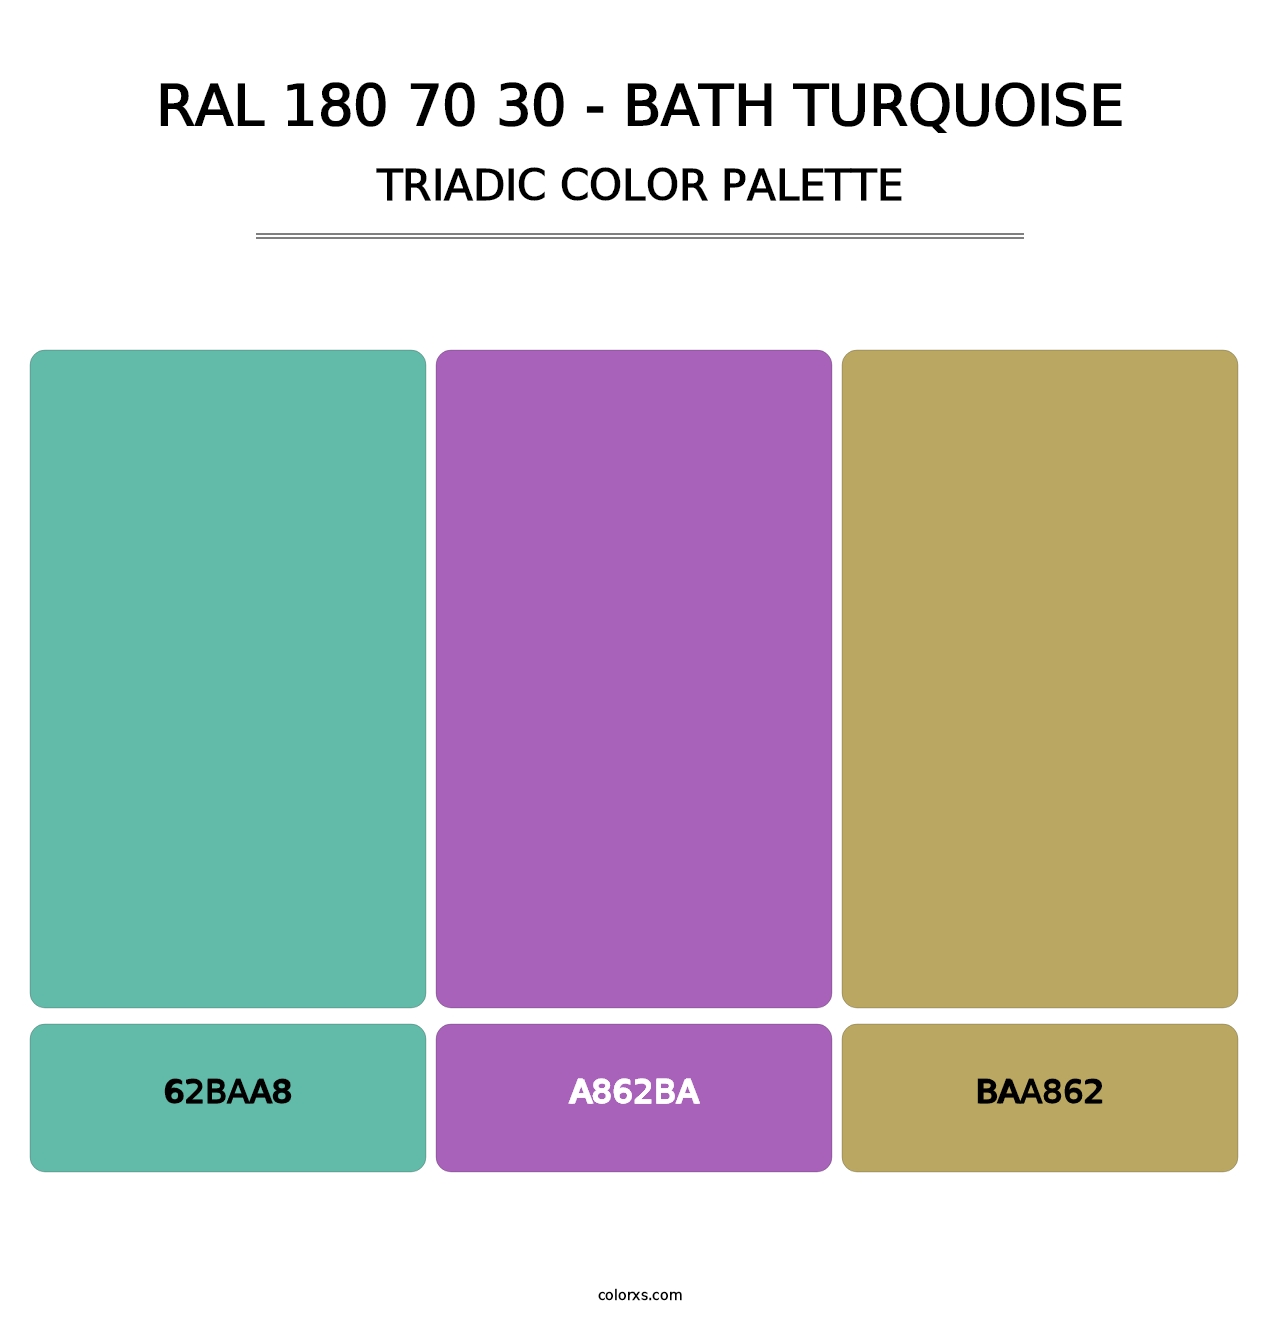 RAL 180 70 30 - Bath Turquoise - Triadic Color Palette